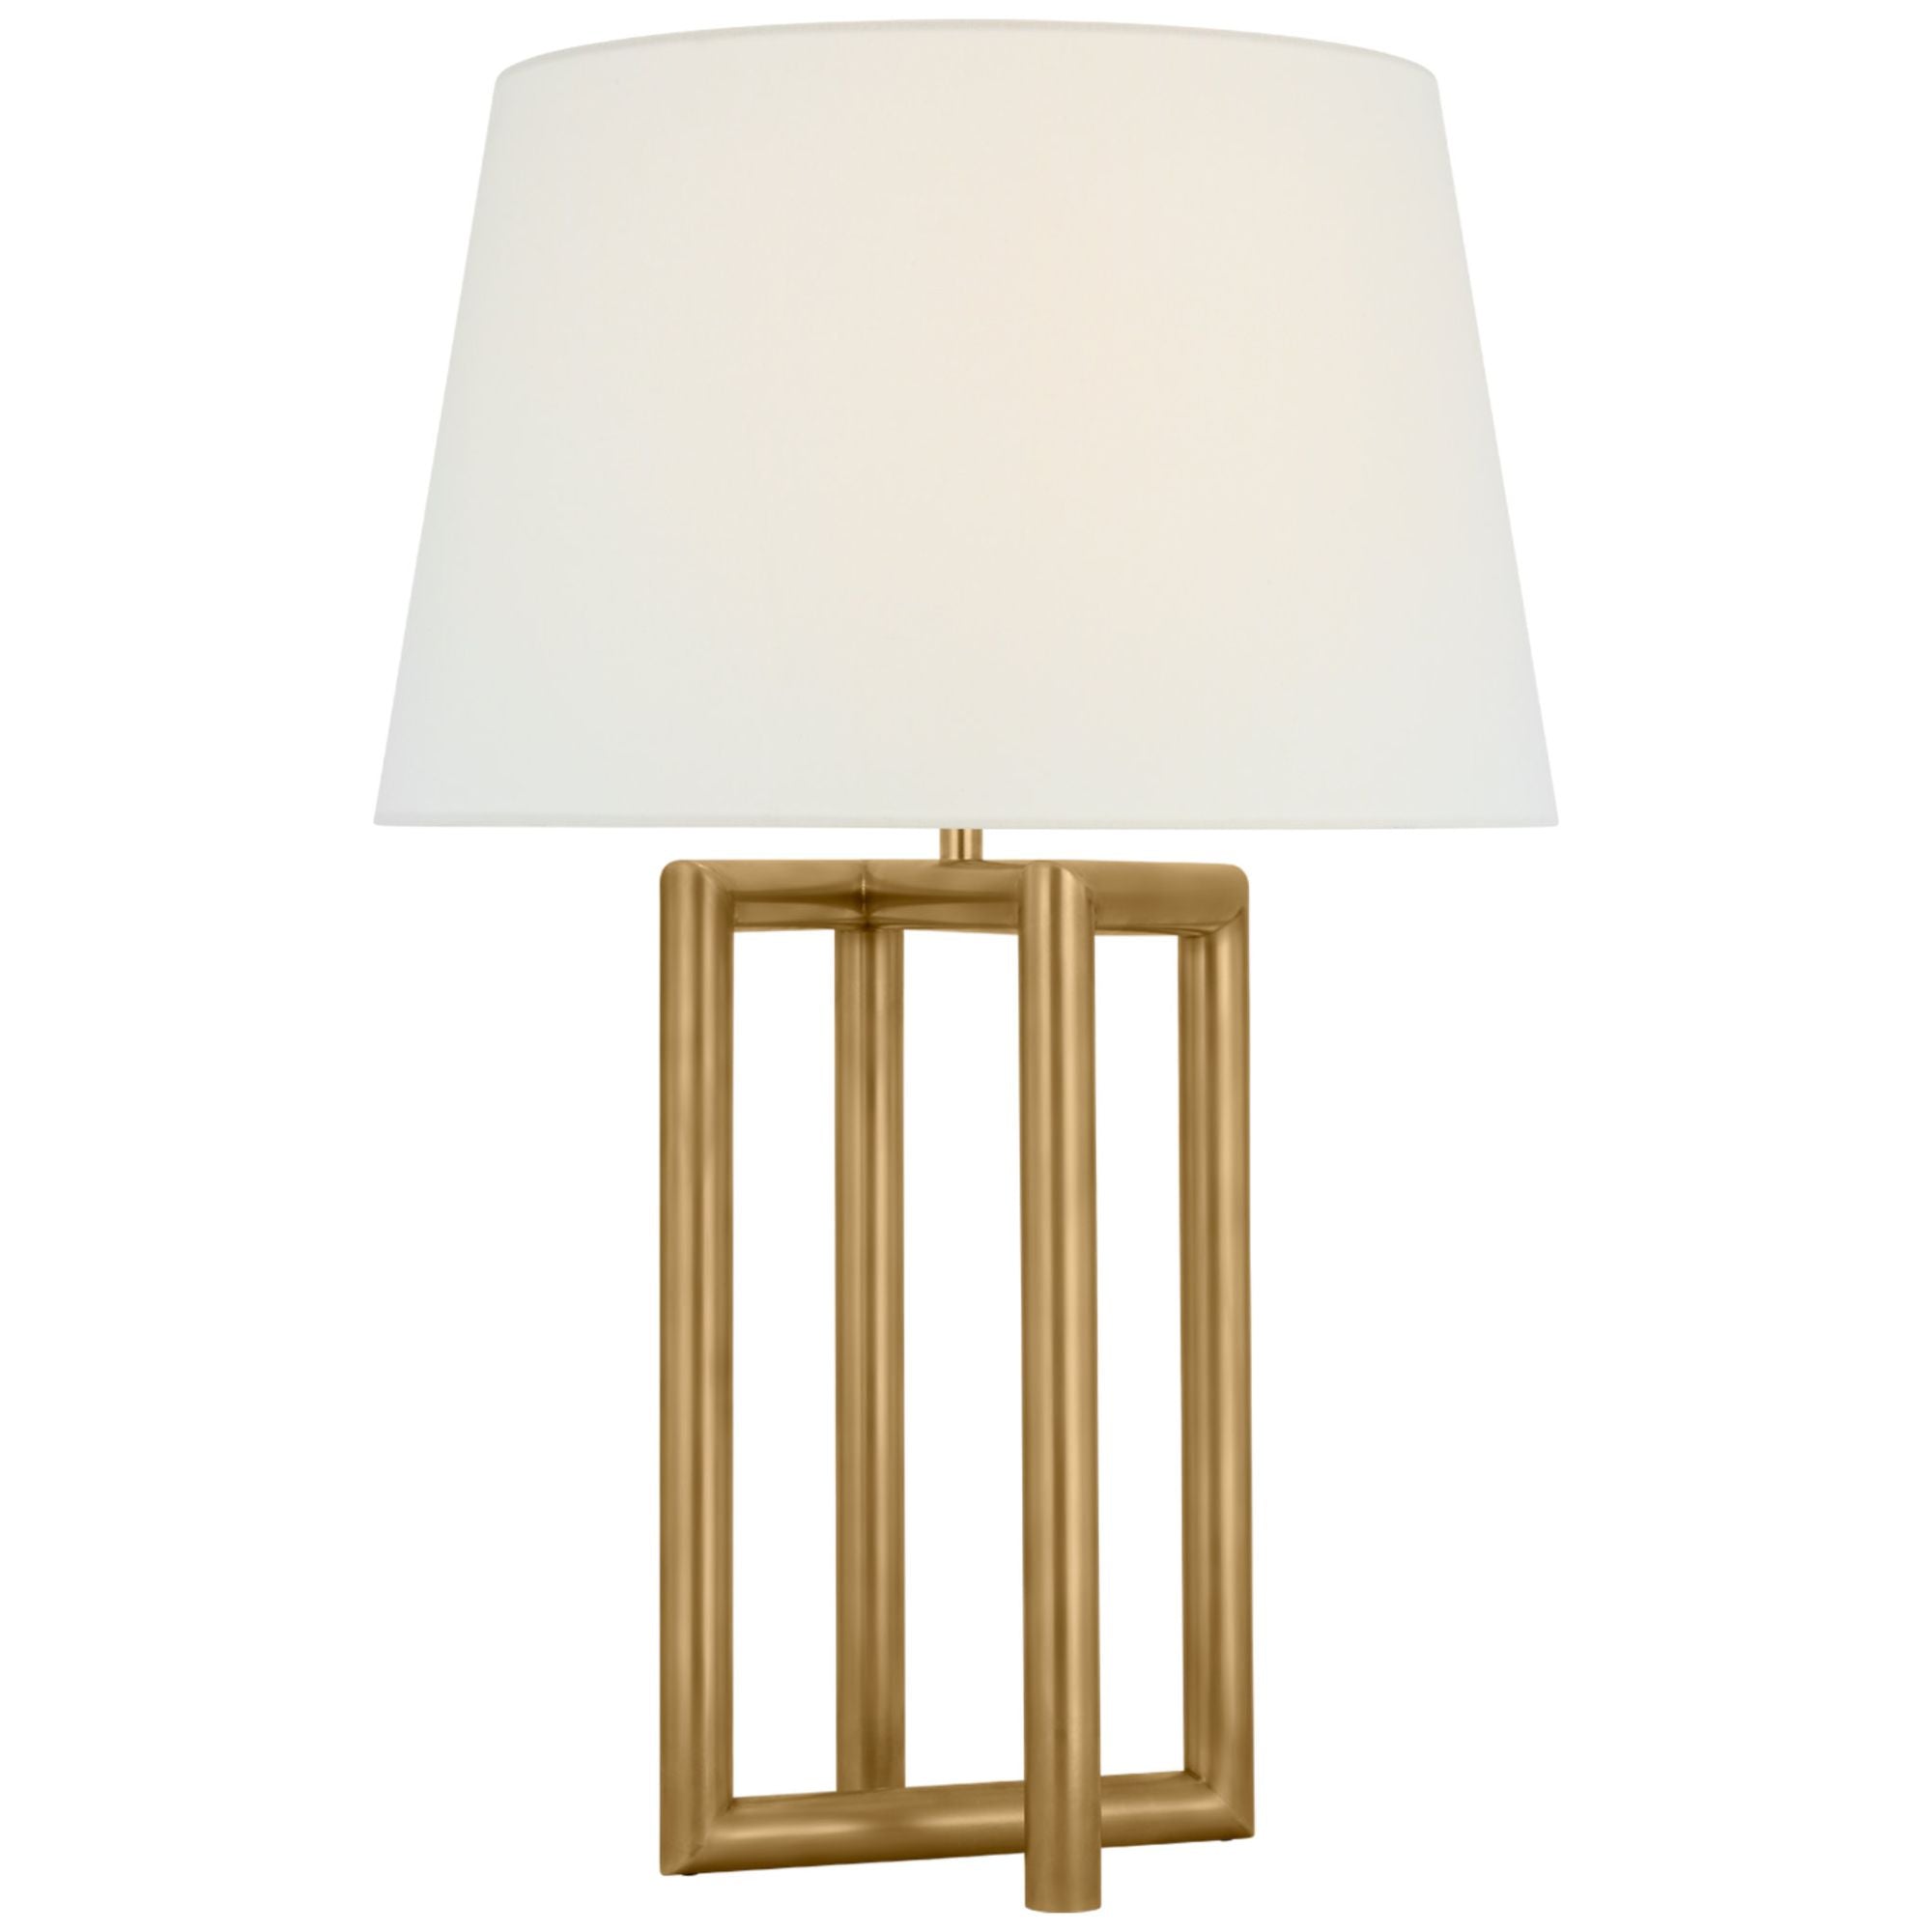 Paloma Contreras Concorde Large Table Lamp in Hand-Rubbed Antique Brass with Linen Shade